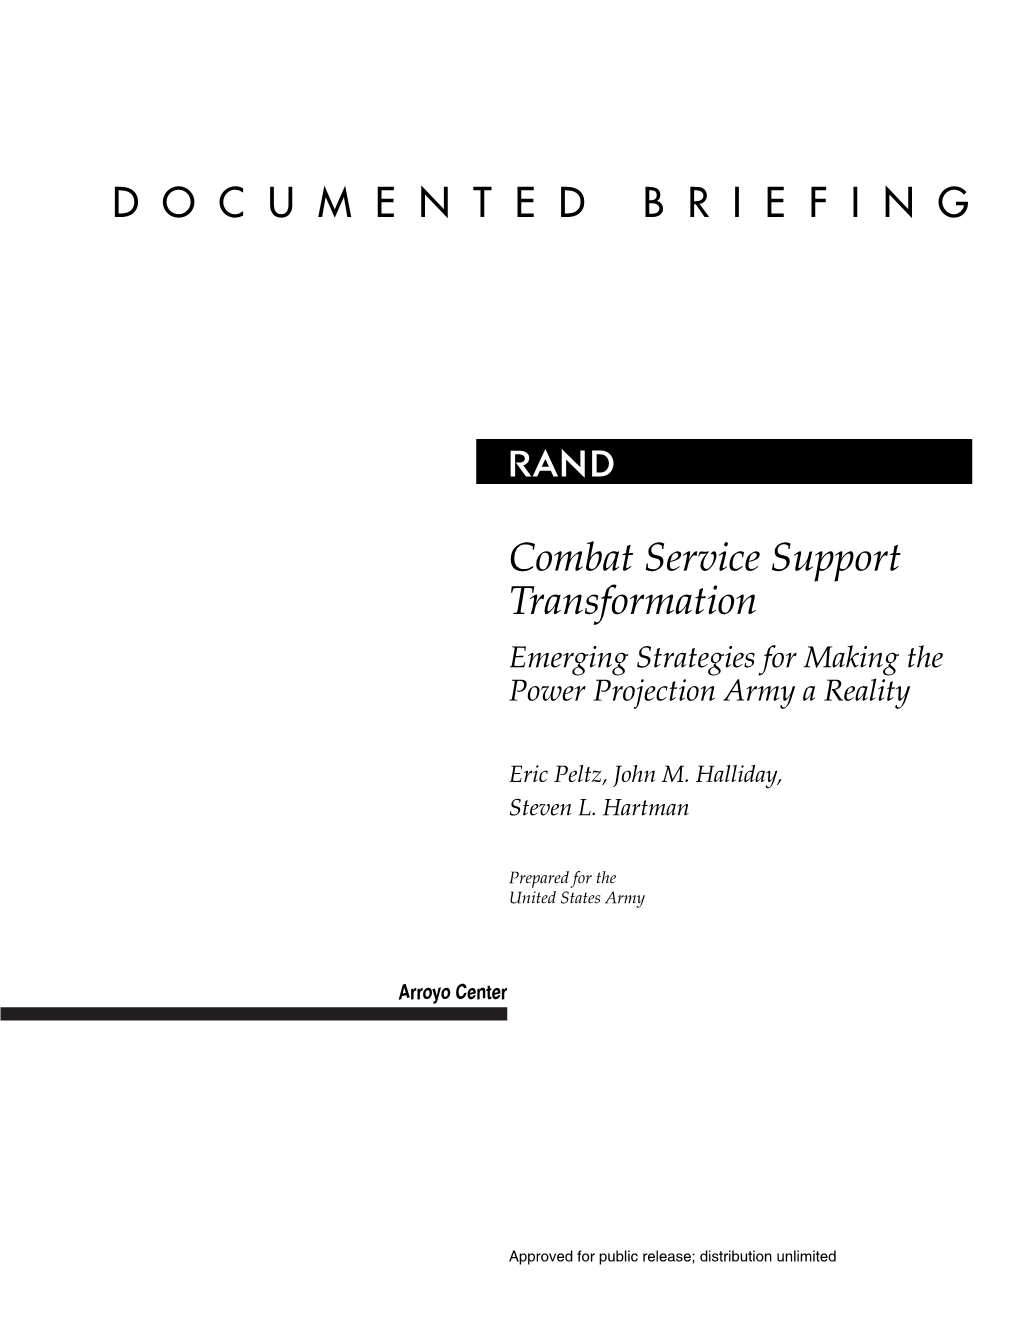 Combat Service Support Transformation: Emerging